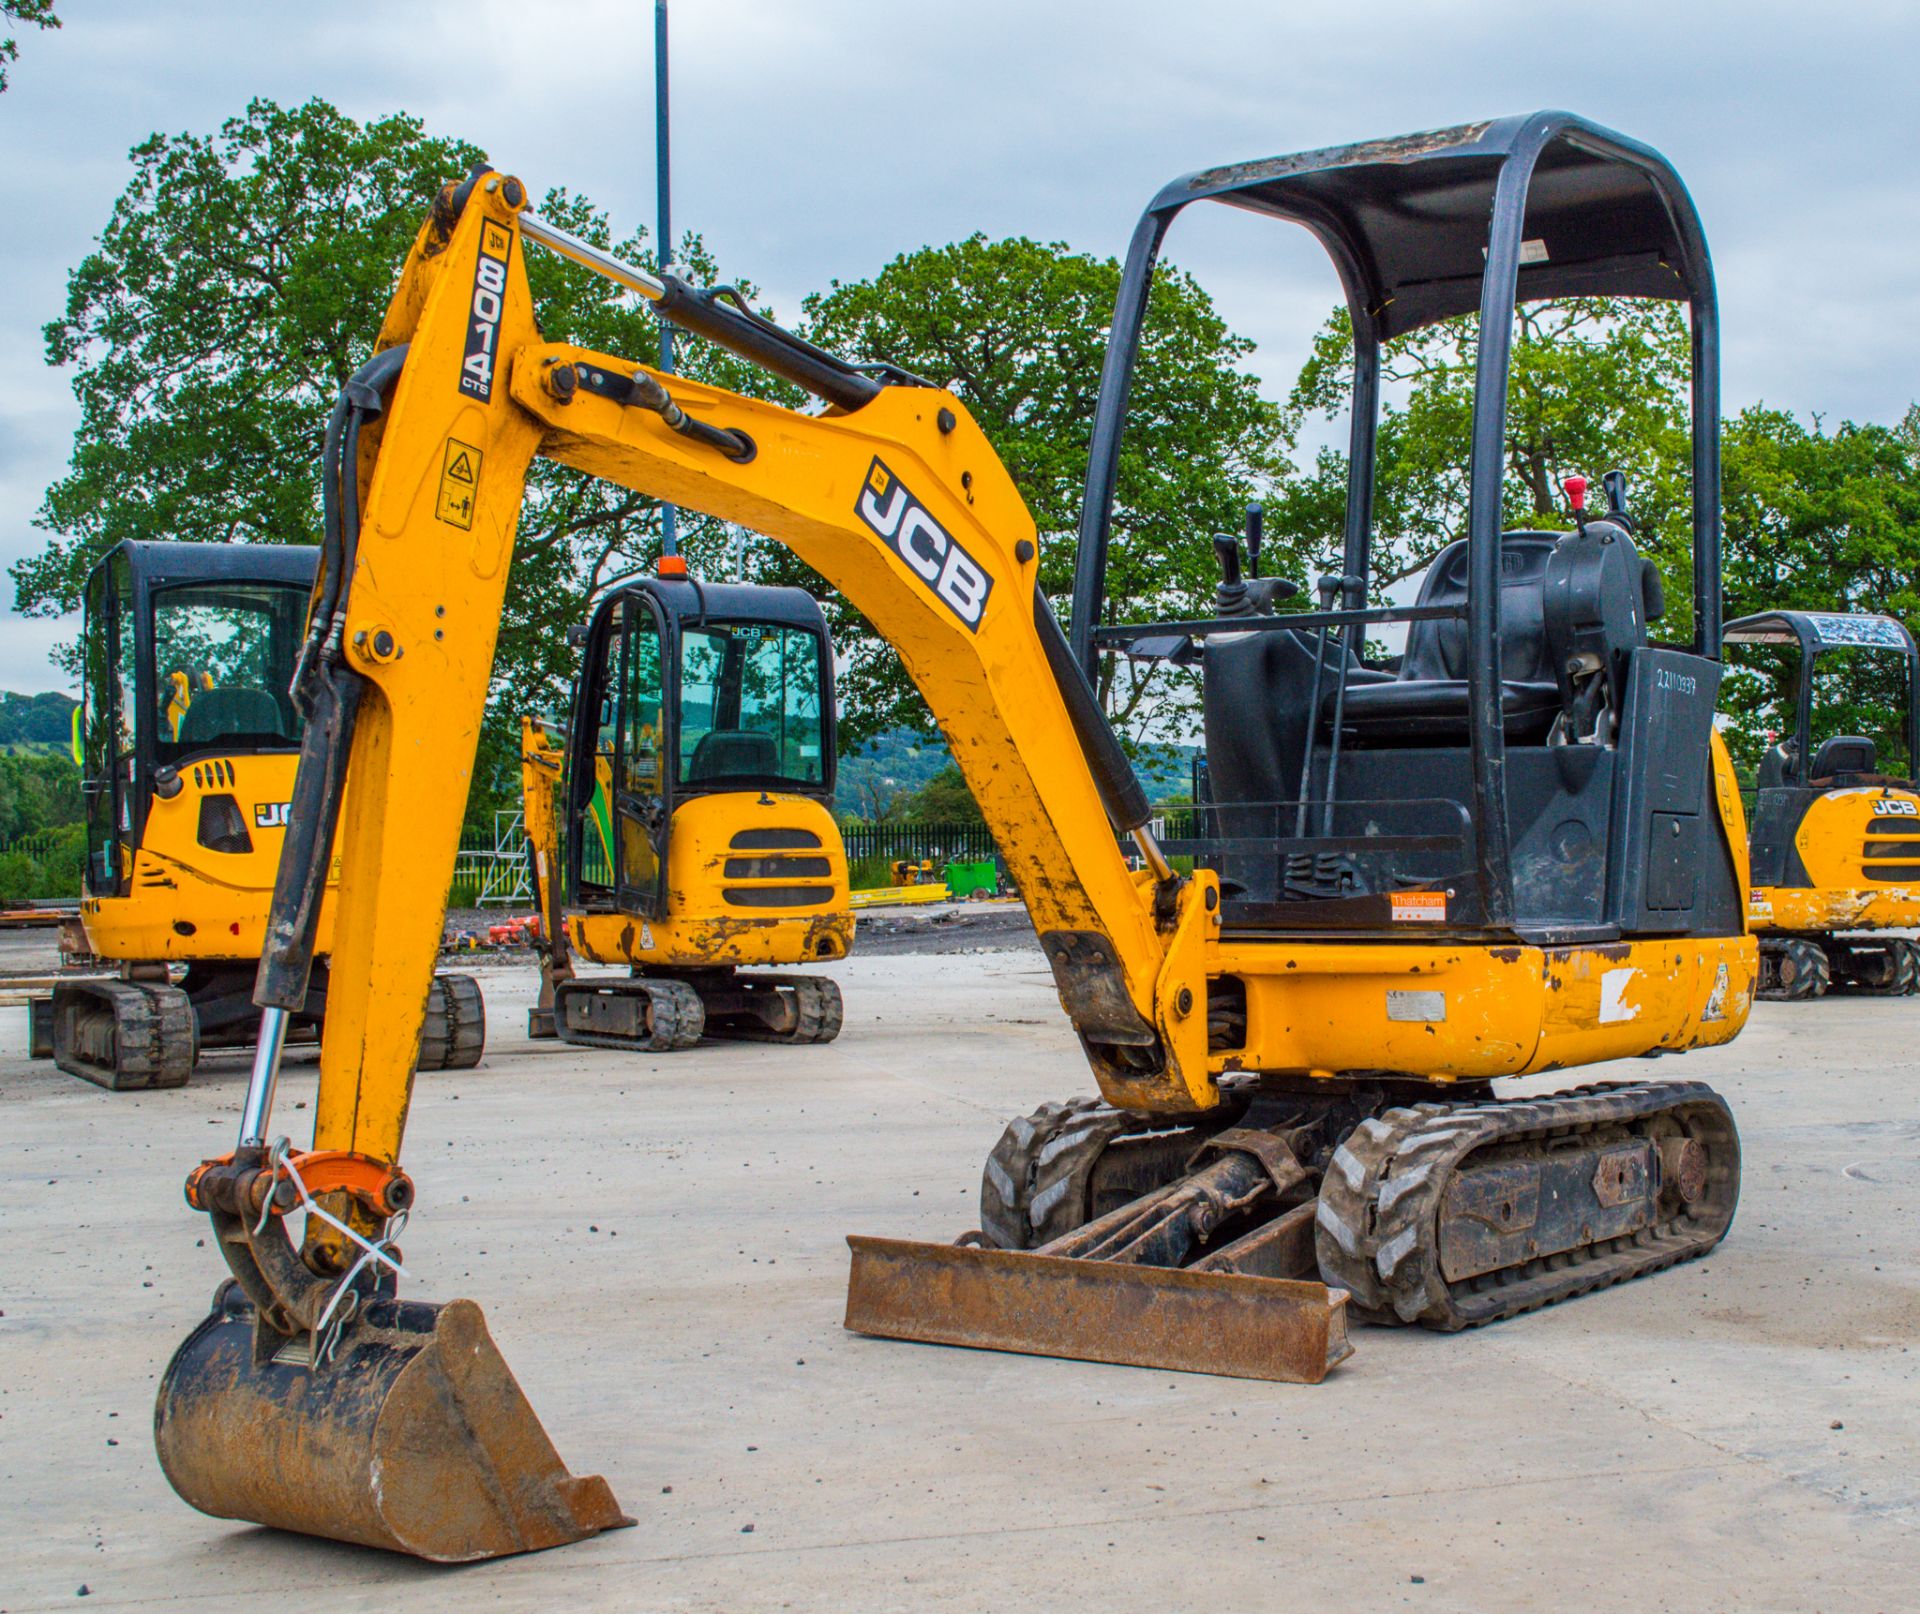 JCB 8014 CTS 1.5 tonne rubber tracked mini excavator Year: 2015 S/N: 2070521 Recorded Hours: 1454